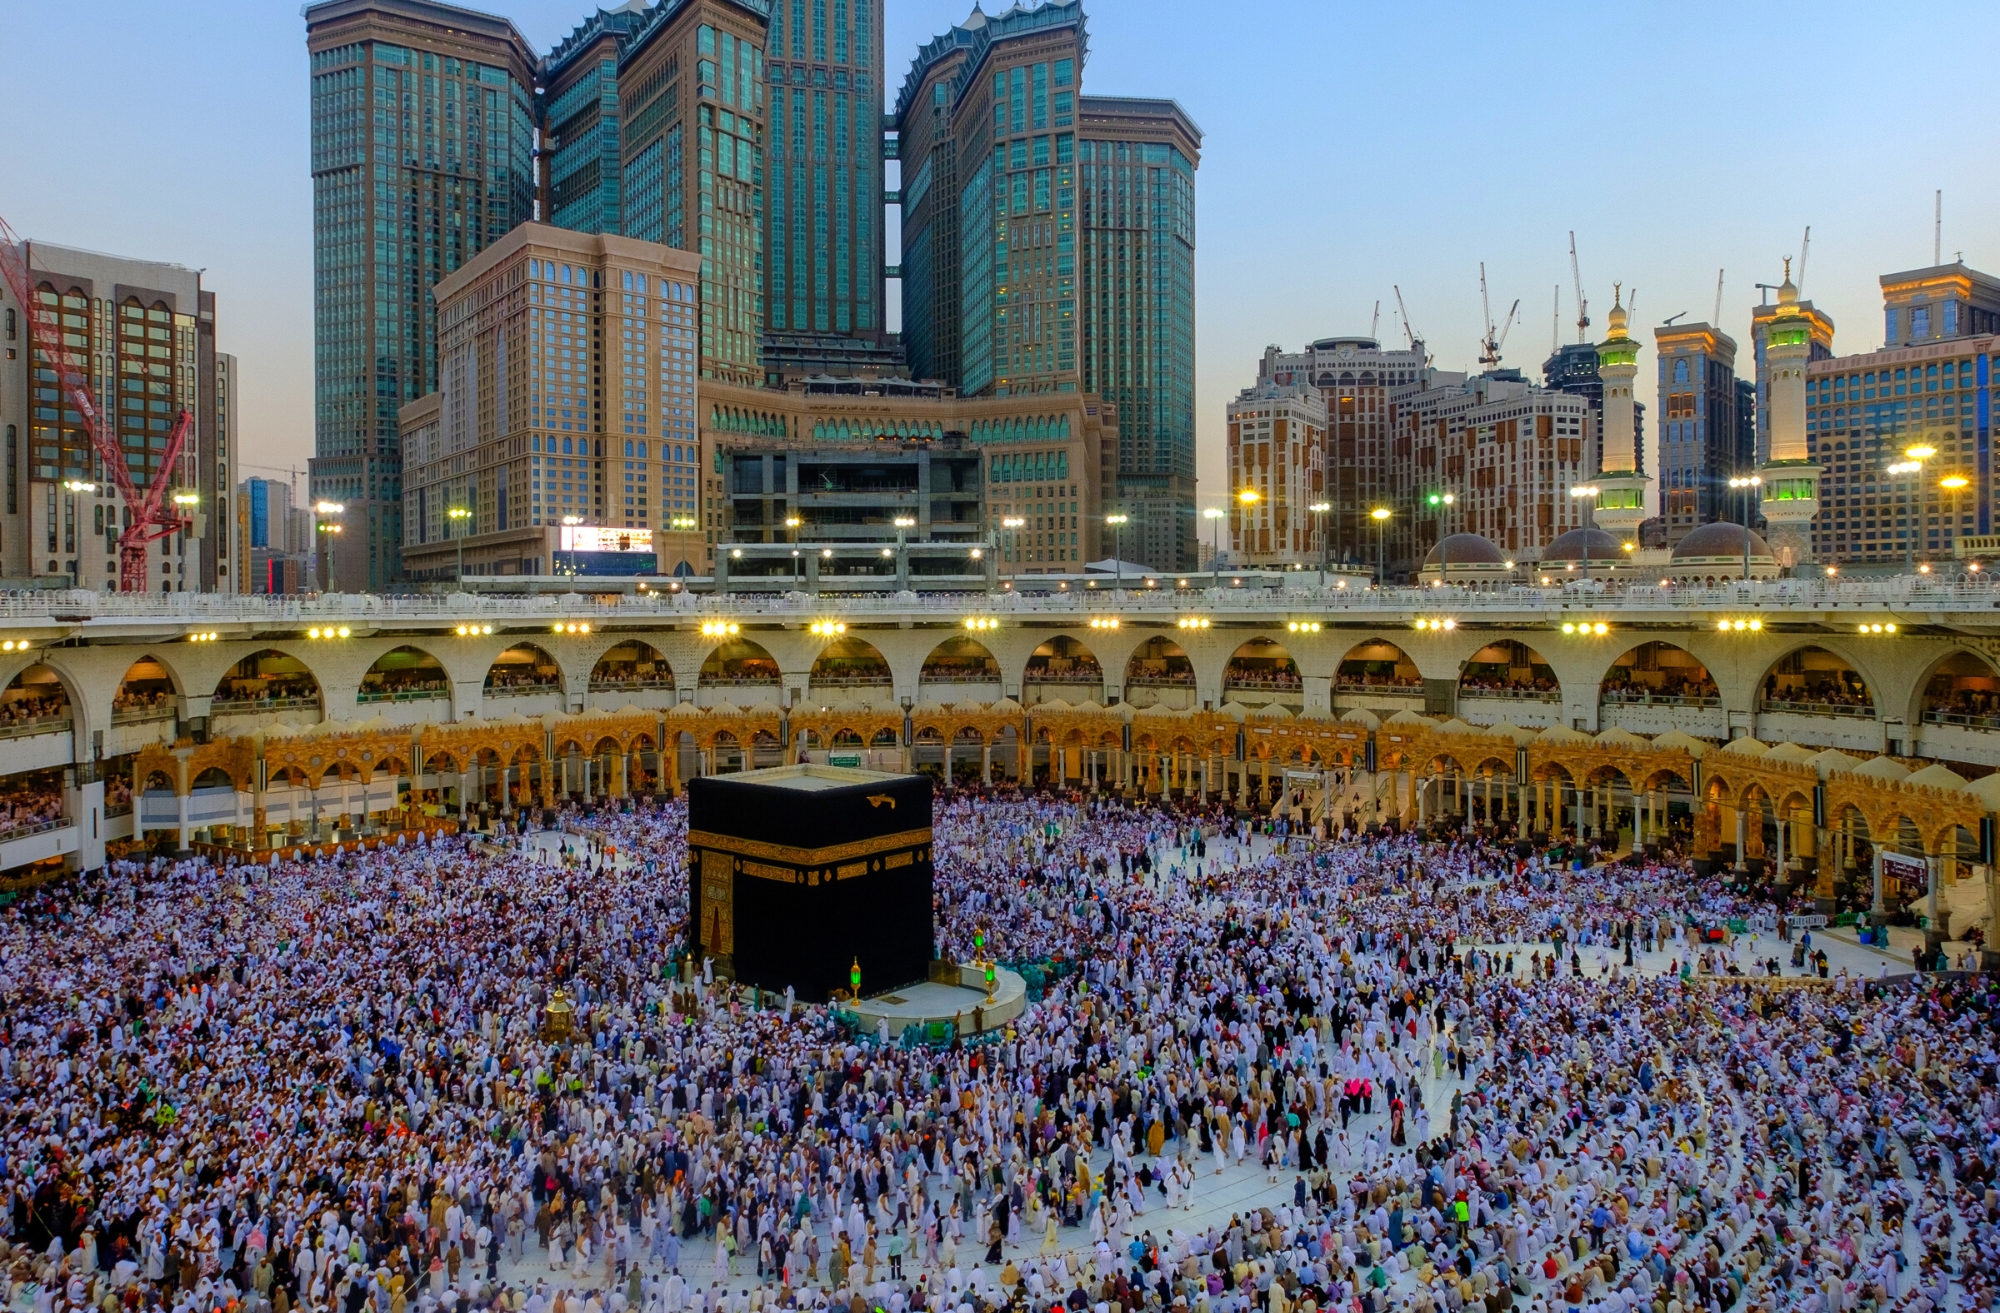 Your Gateway to Mecca: Umrah Packages from UK for UK Residents